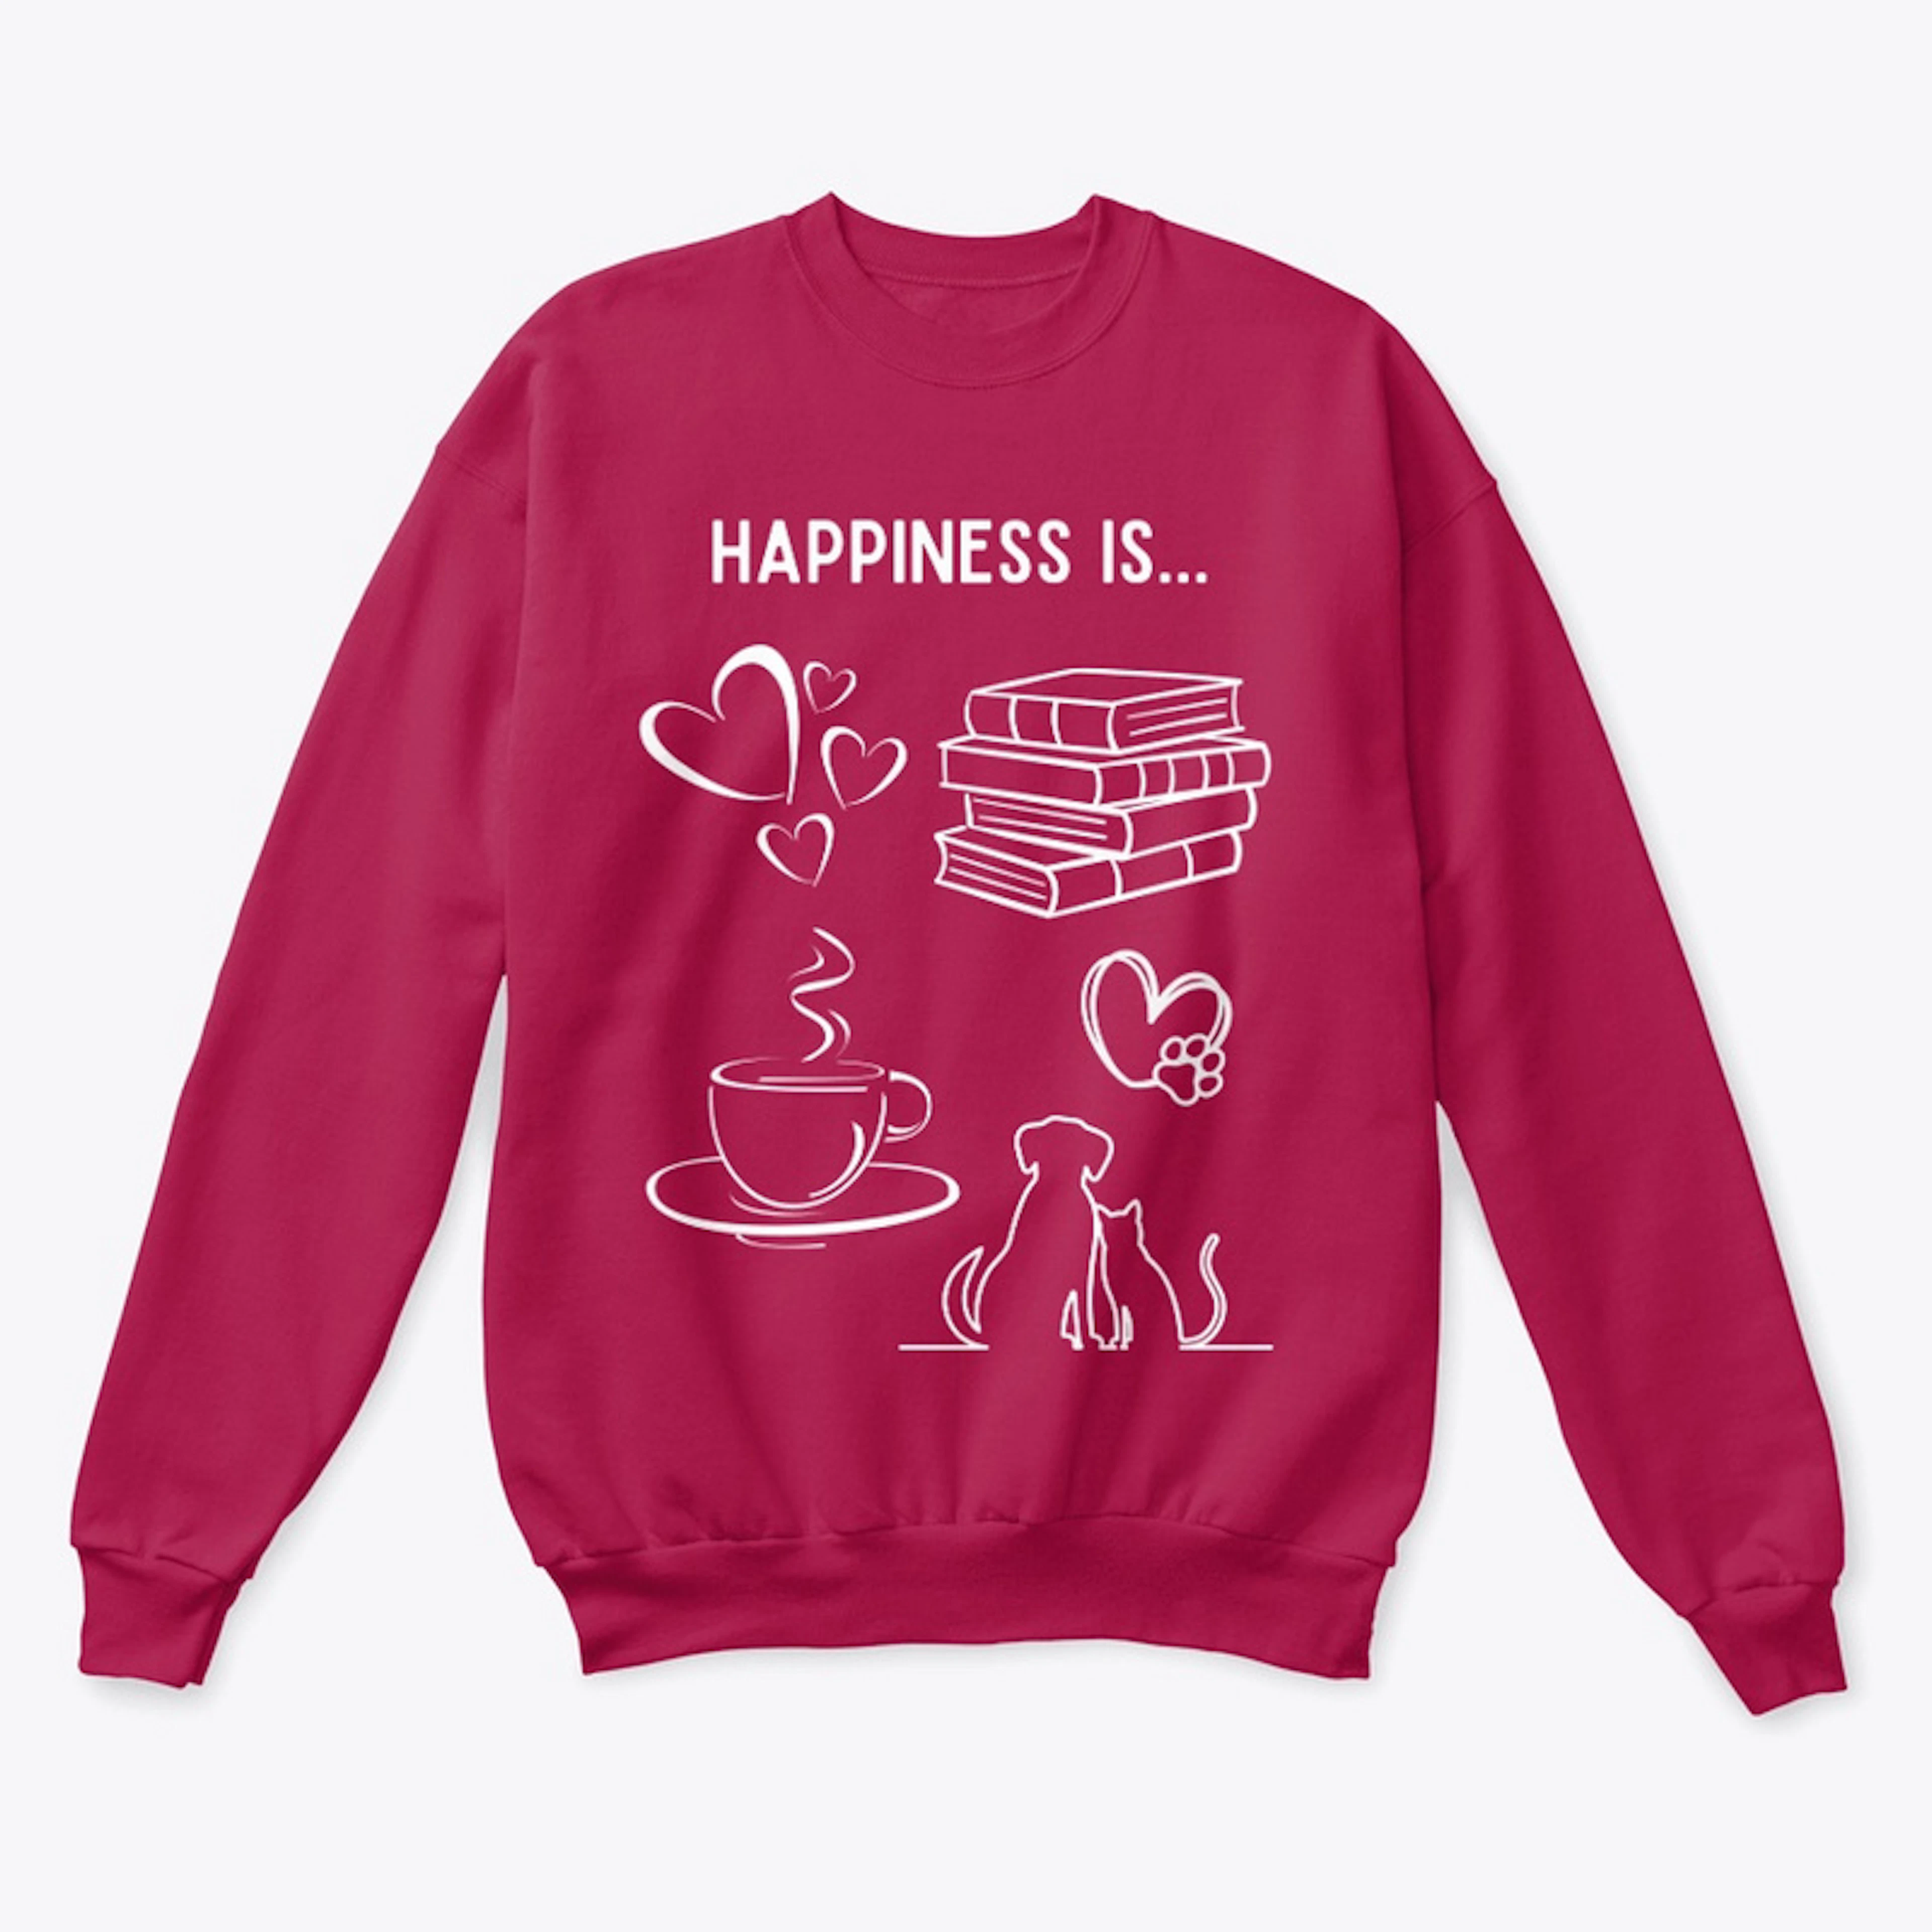 Happiness Is... shirt